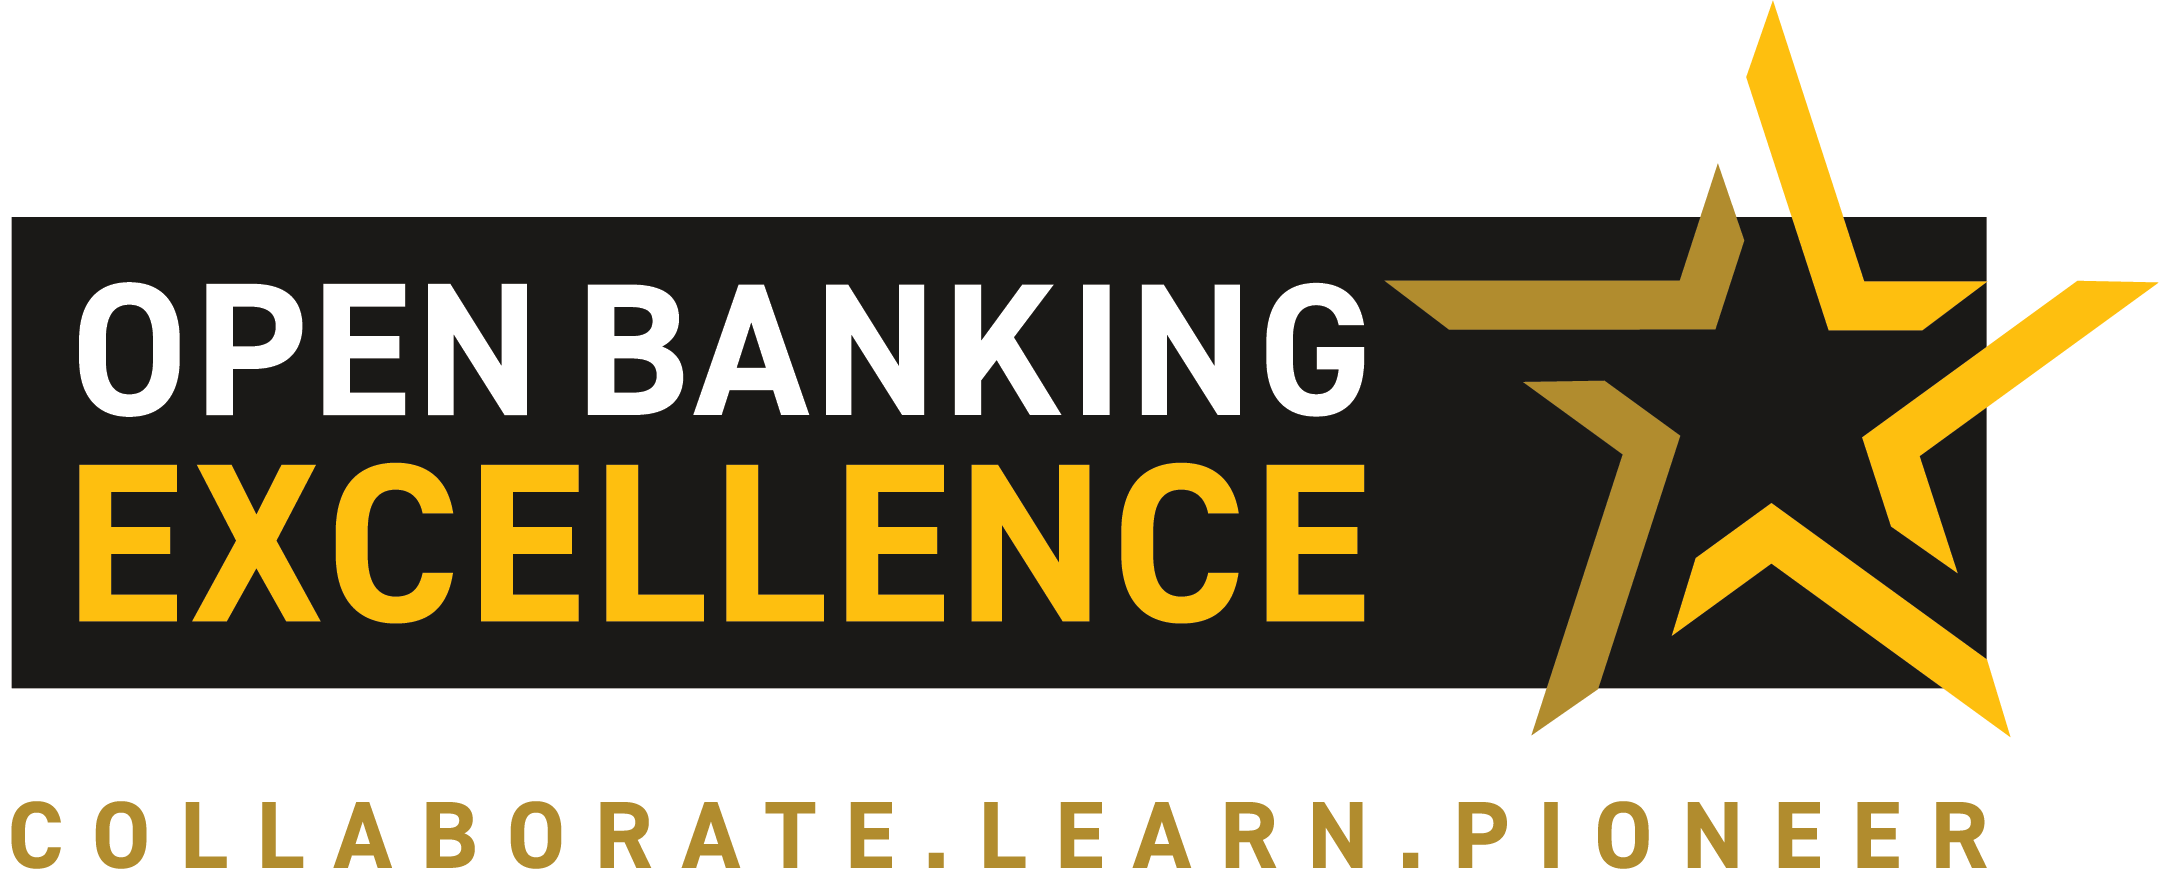 open banking excellence